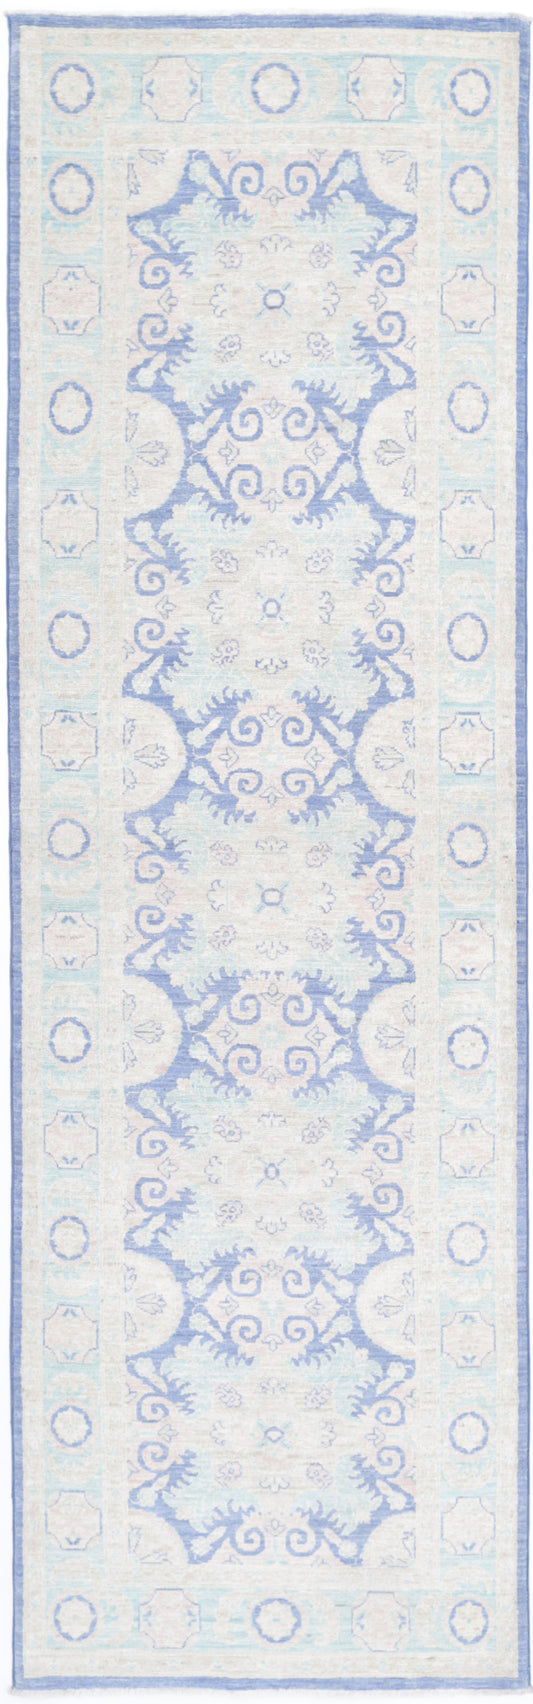 Traditional Hand Knotted Serenity Tabriz Wool Rug of Size 2'8'' X 9'7'' in Blue and Teal Colors - Made in Afghanistan